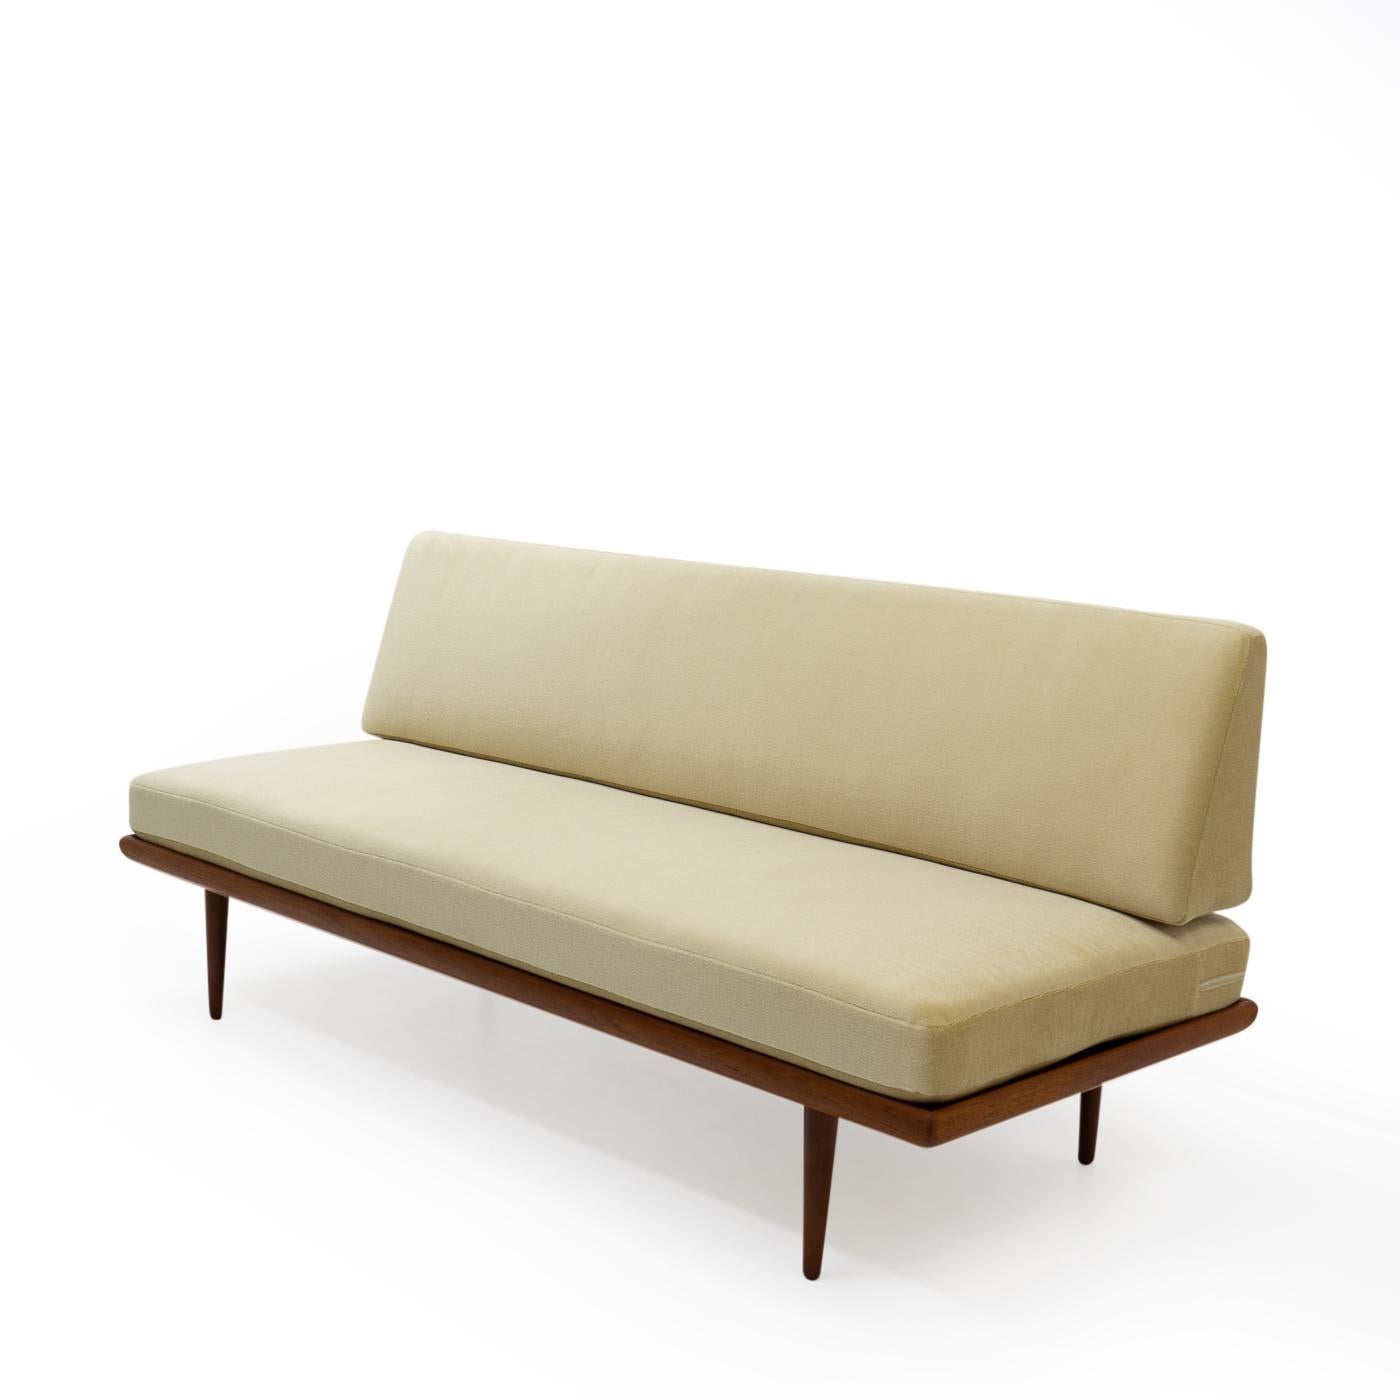 A vintage Minerva sofa / daybed designed by Peter Hvidt & Orla Mølgaard-Nielsen, originating from the early 1960s, produced by France & Son.


The sofa features a teak frame, with new beige-coloured natural mohair: 

Mohair has as an advantage that